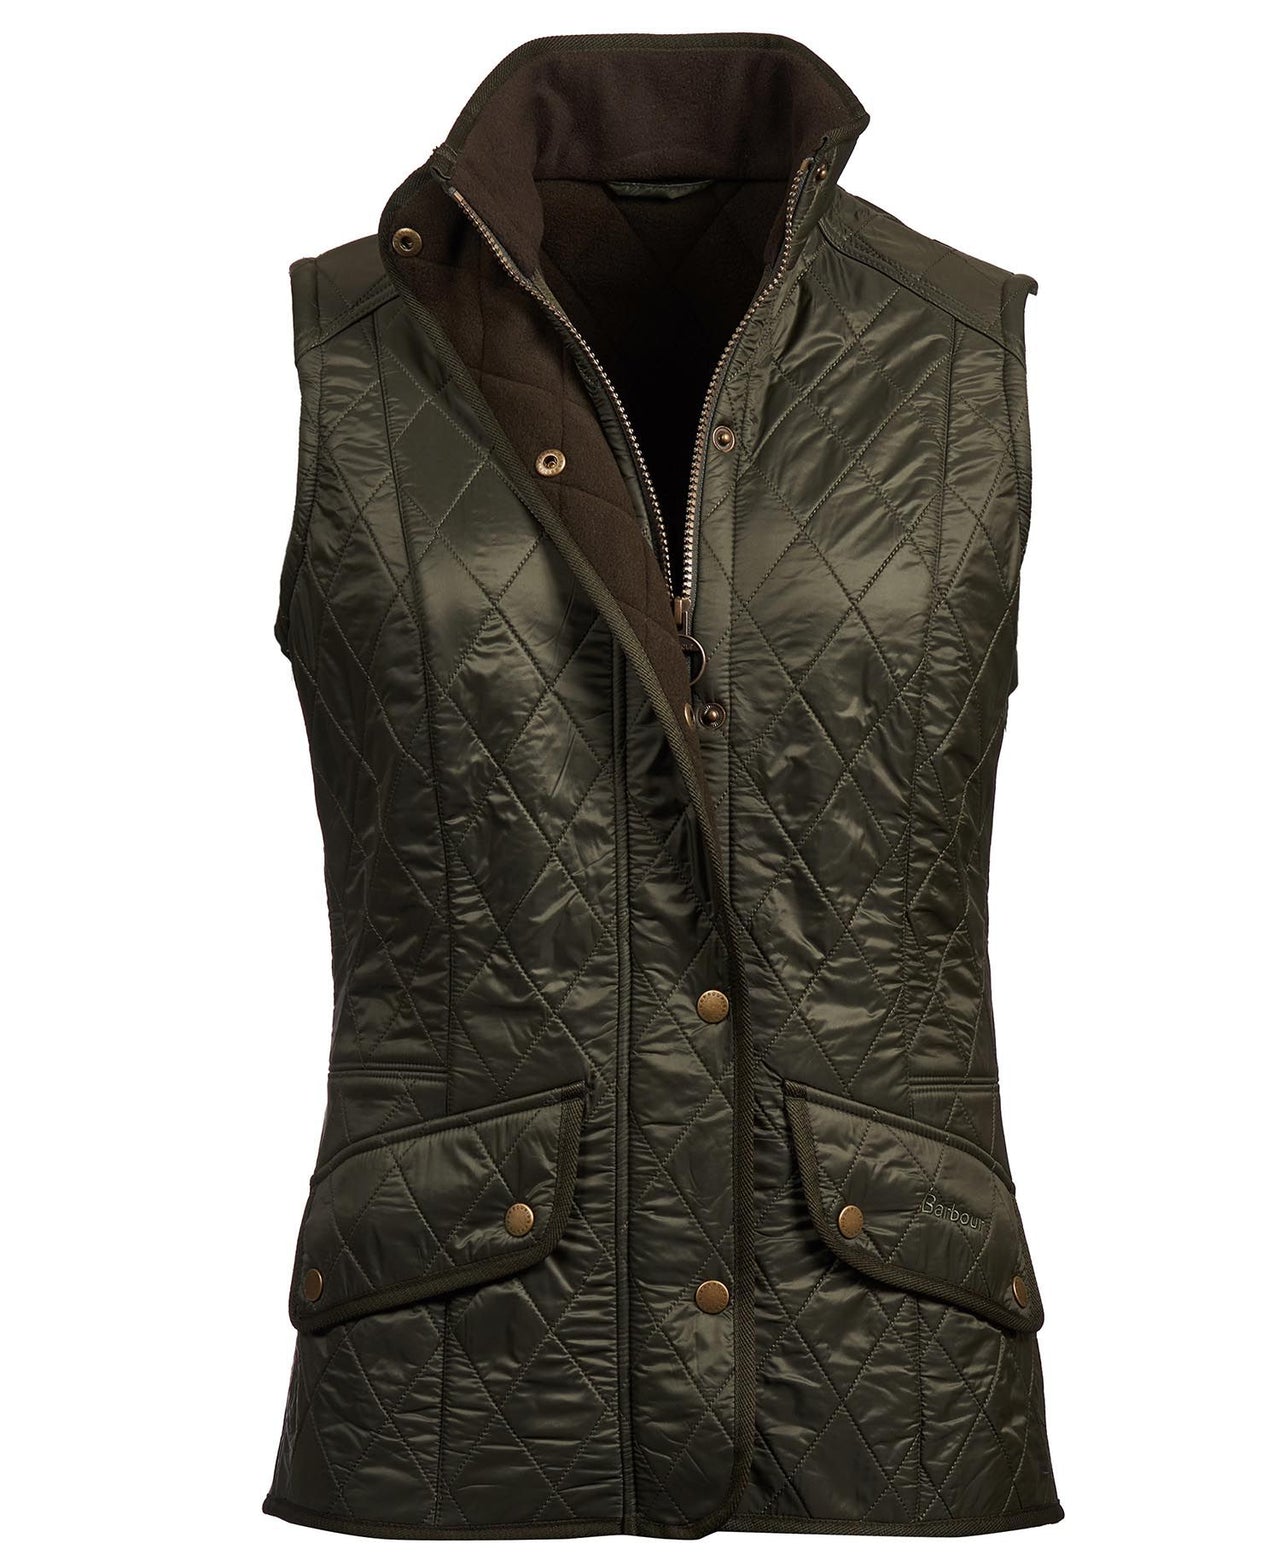 Barbour Cavalry Gilet - Olive/Olive